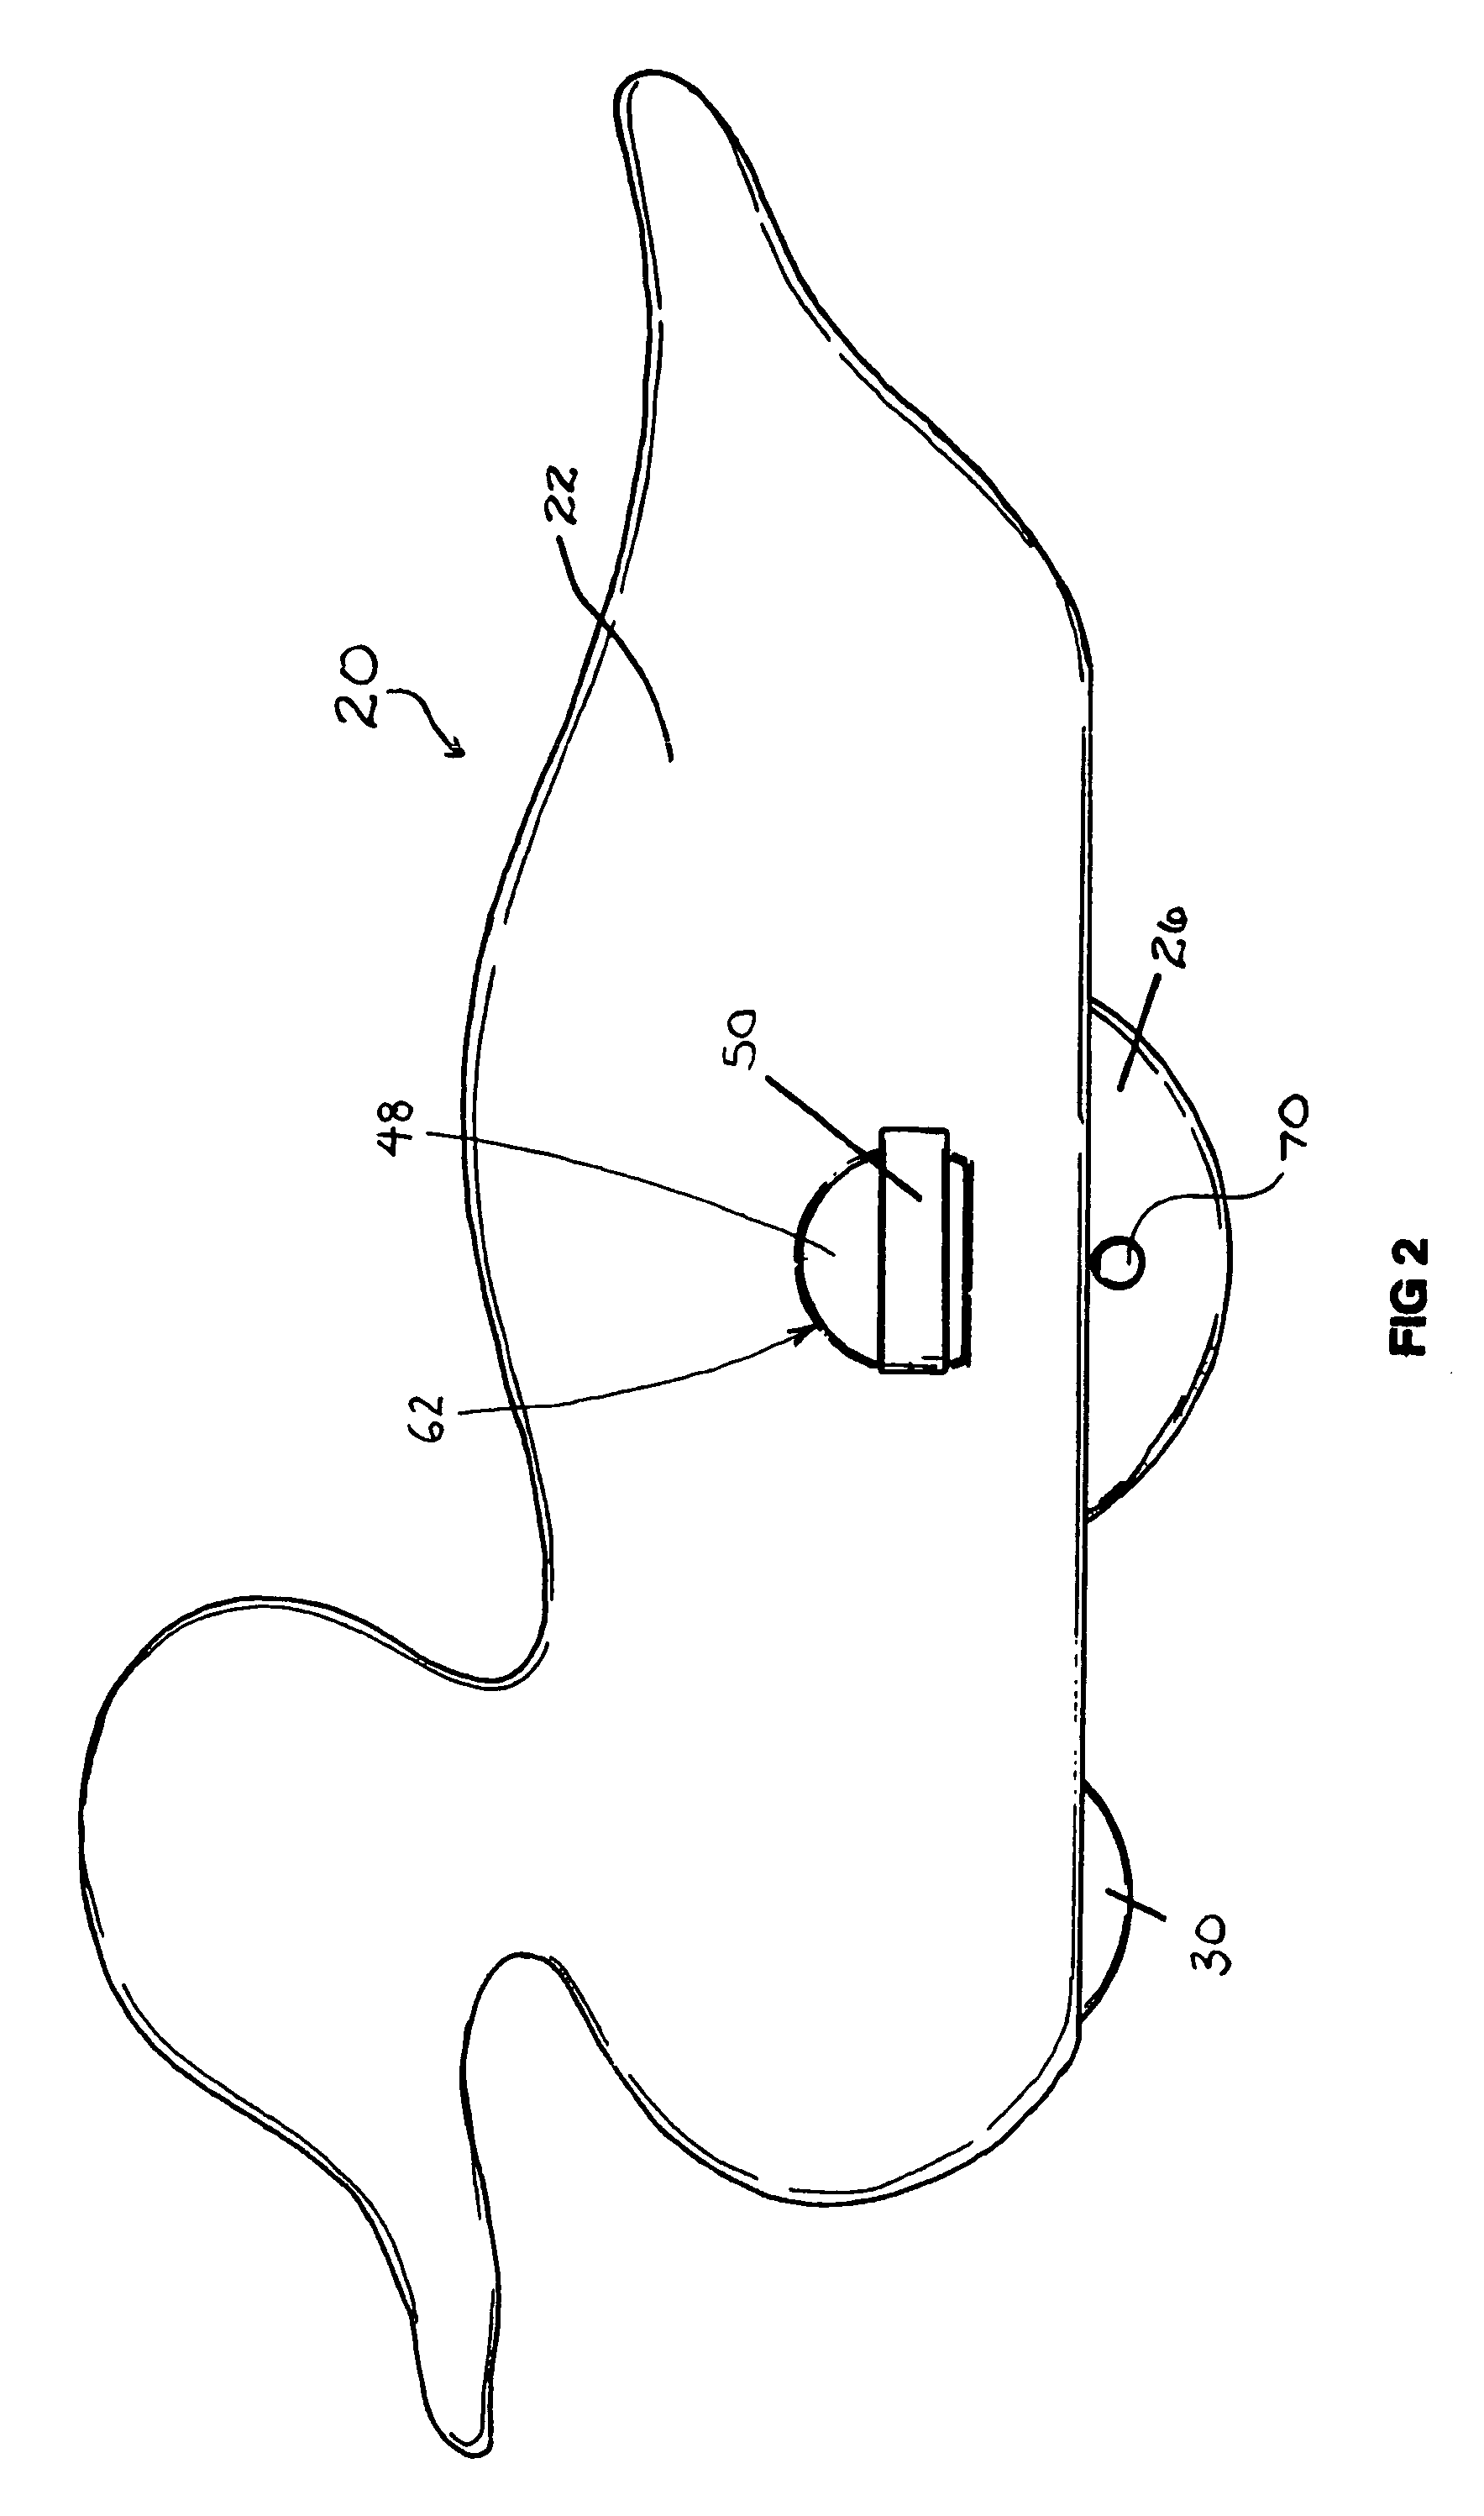 Self-righting waterfowl decoy with integrated anchor and locking mechanism